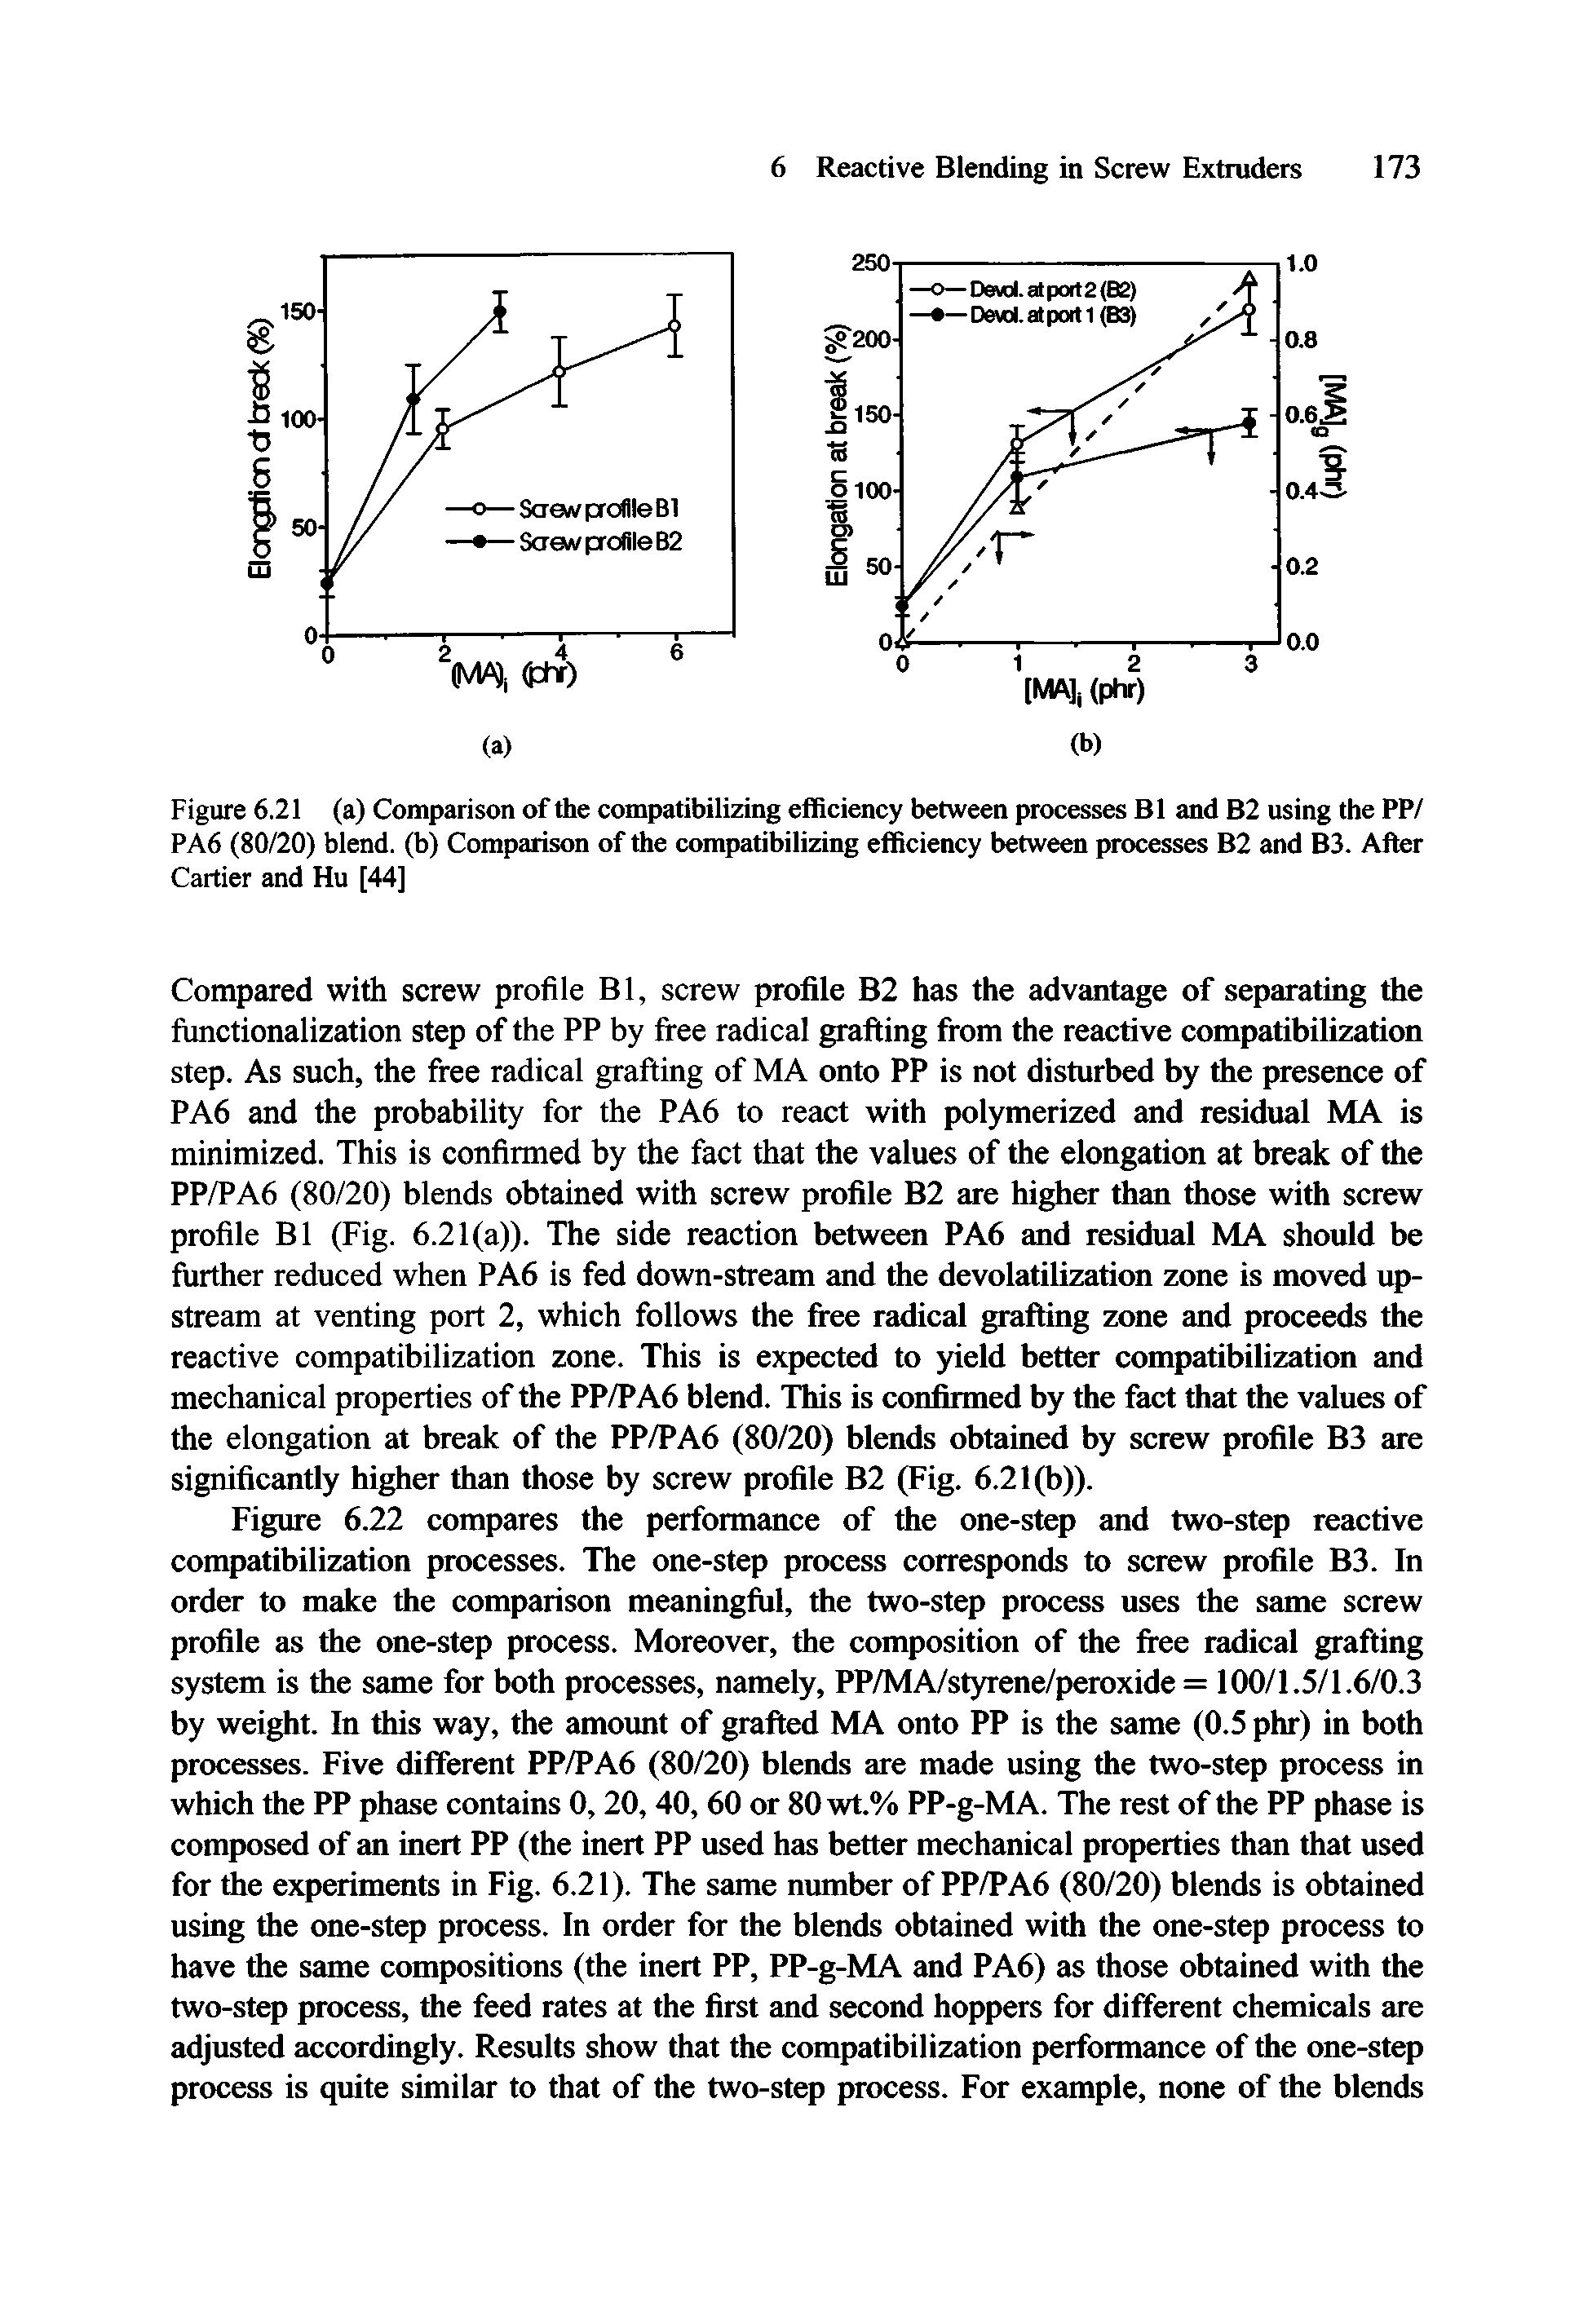 Figure 6.22 compares the performance of the one-step and two-step reactive compatibilization processes. The one-step process corresponds to screw profile B3. In order to make the comparison meaningful, the two-step process uses the same screw profile as the one-step process. Moreover, the composition of the free radical grafting system is the same for both processes, namely, PP/MA/styrene/peroxide = 100/1.5/1.6/0.3 by weight. In this way, the amount of grafted MA onto PP is the same (0.5 phr) in both processes. Five different PP/PA6 (80/20) blends are made using the two-step process in which the PP phase contains 0,20,40,60 or 80wt.% PP-g-MA. The rest of the PP phase is composed of an inert PP (the inert PP used has better mechanical properties than that used for the experiments in Fig. 6.21). The same number of PP/PA6 (80/20) blends is obtained using the one-step process. In order for the blends obtained with the one-step process to have the same compositions (the inert PP, PP-g-MA and PA6) as those obtained with the two-step proeess, the feed rates at the first and second hoppers for different chemicals are adjusted accordingly. Results show that the compatibilization perfonnance of the one-step process is quite similar to that of the two-step process. For example, none of the blends...